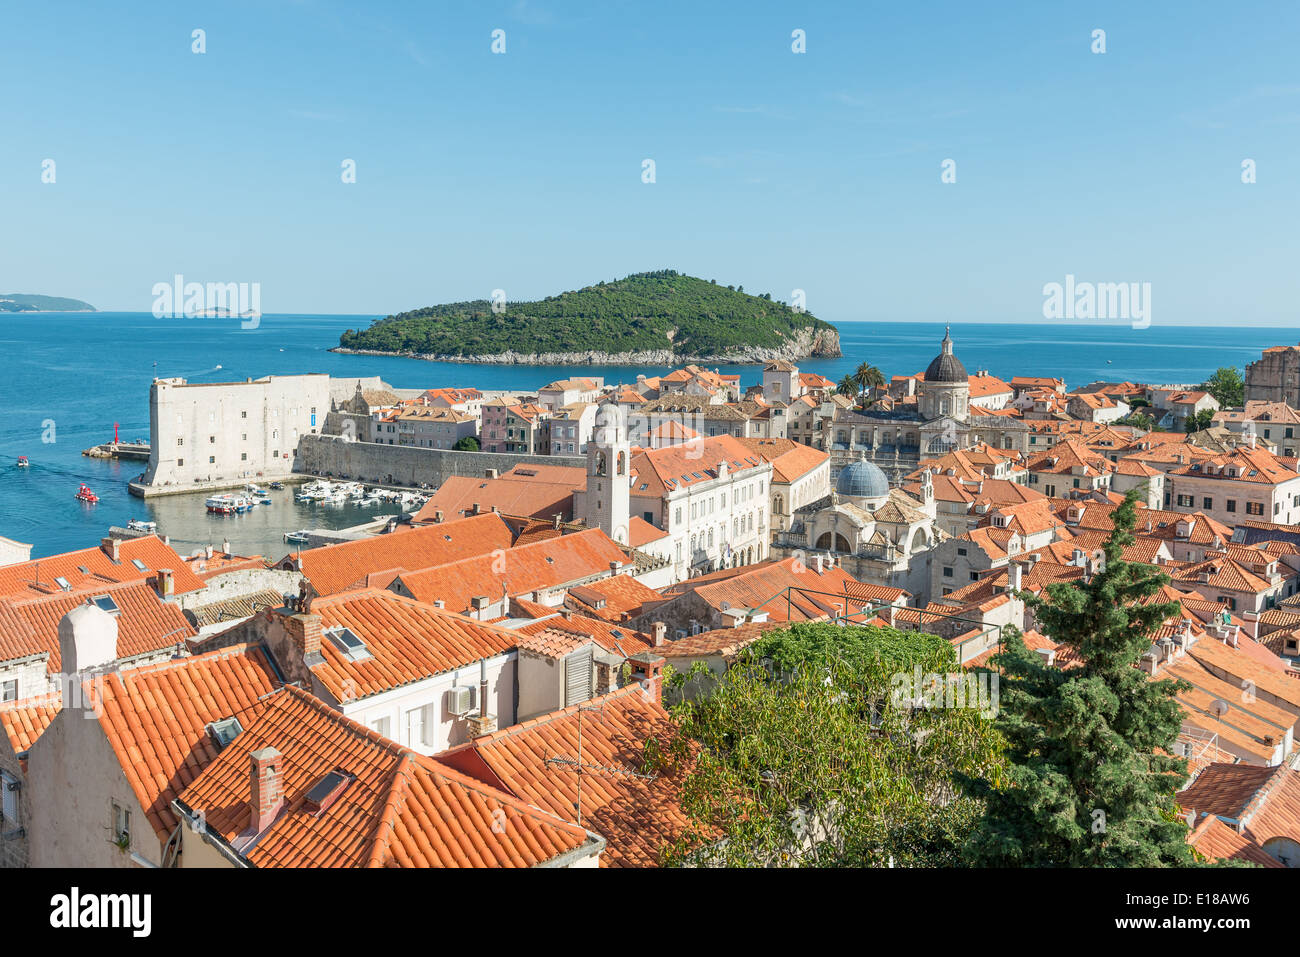 Red rooftops of the old town of Dubrovnik with the sea in the background - Dubrovnik, Croatia Stock Photo